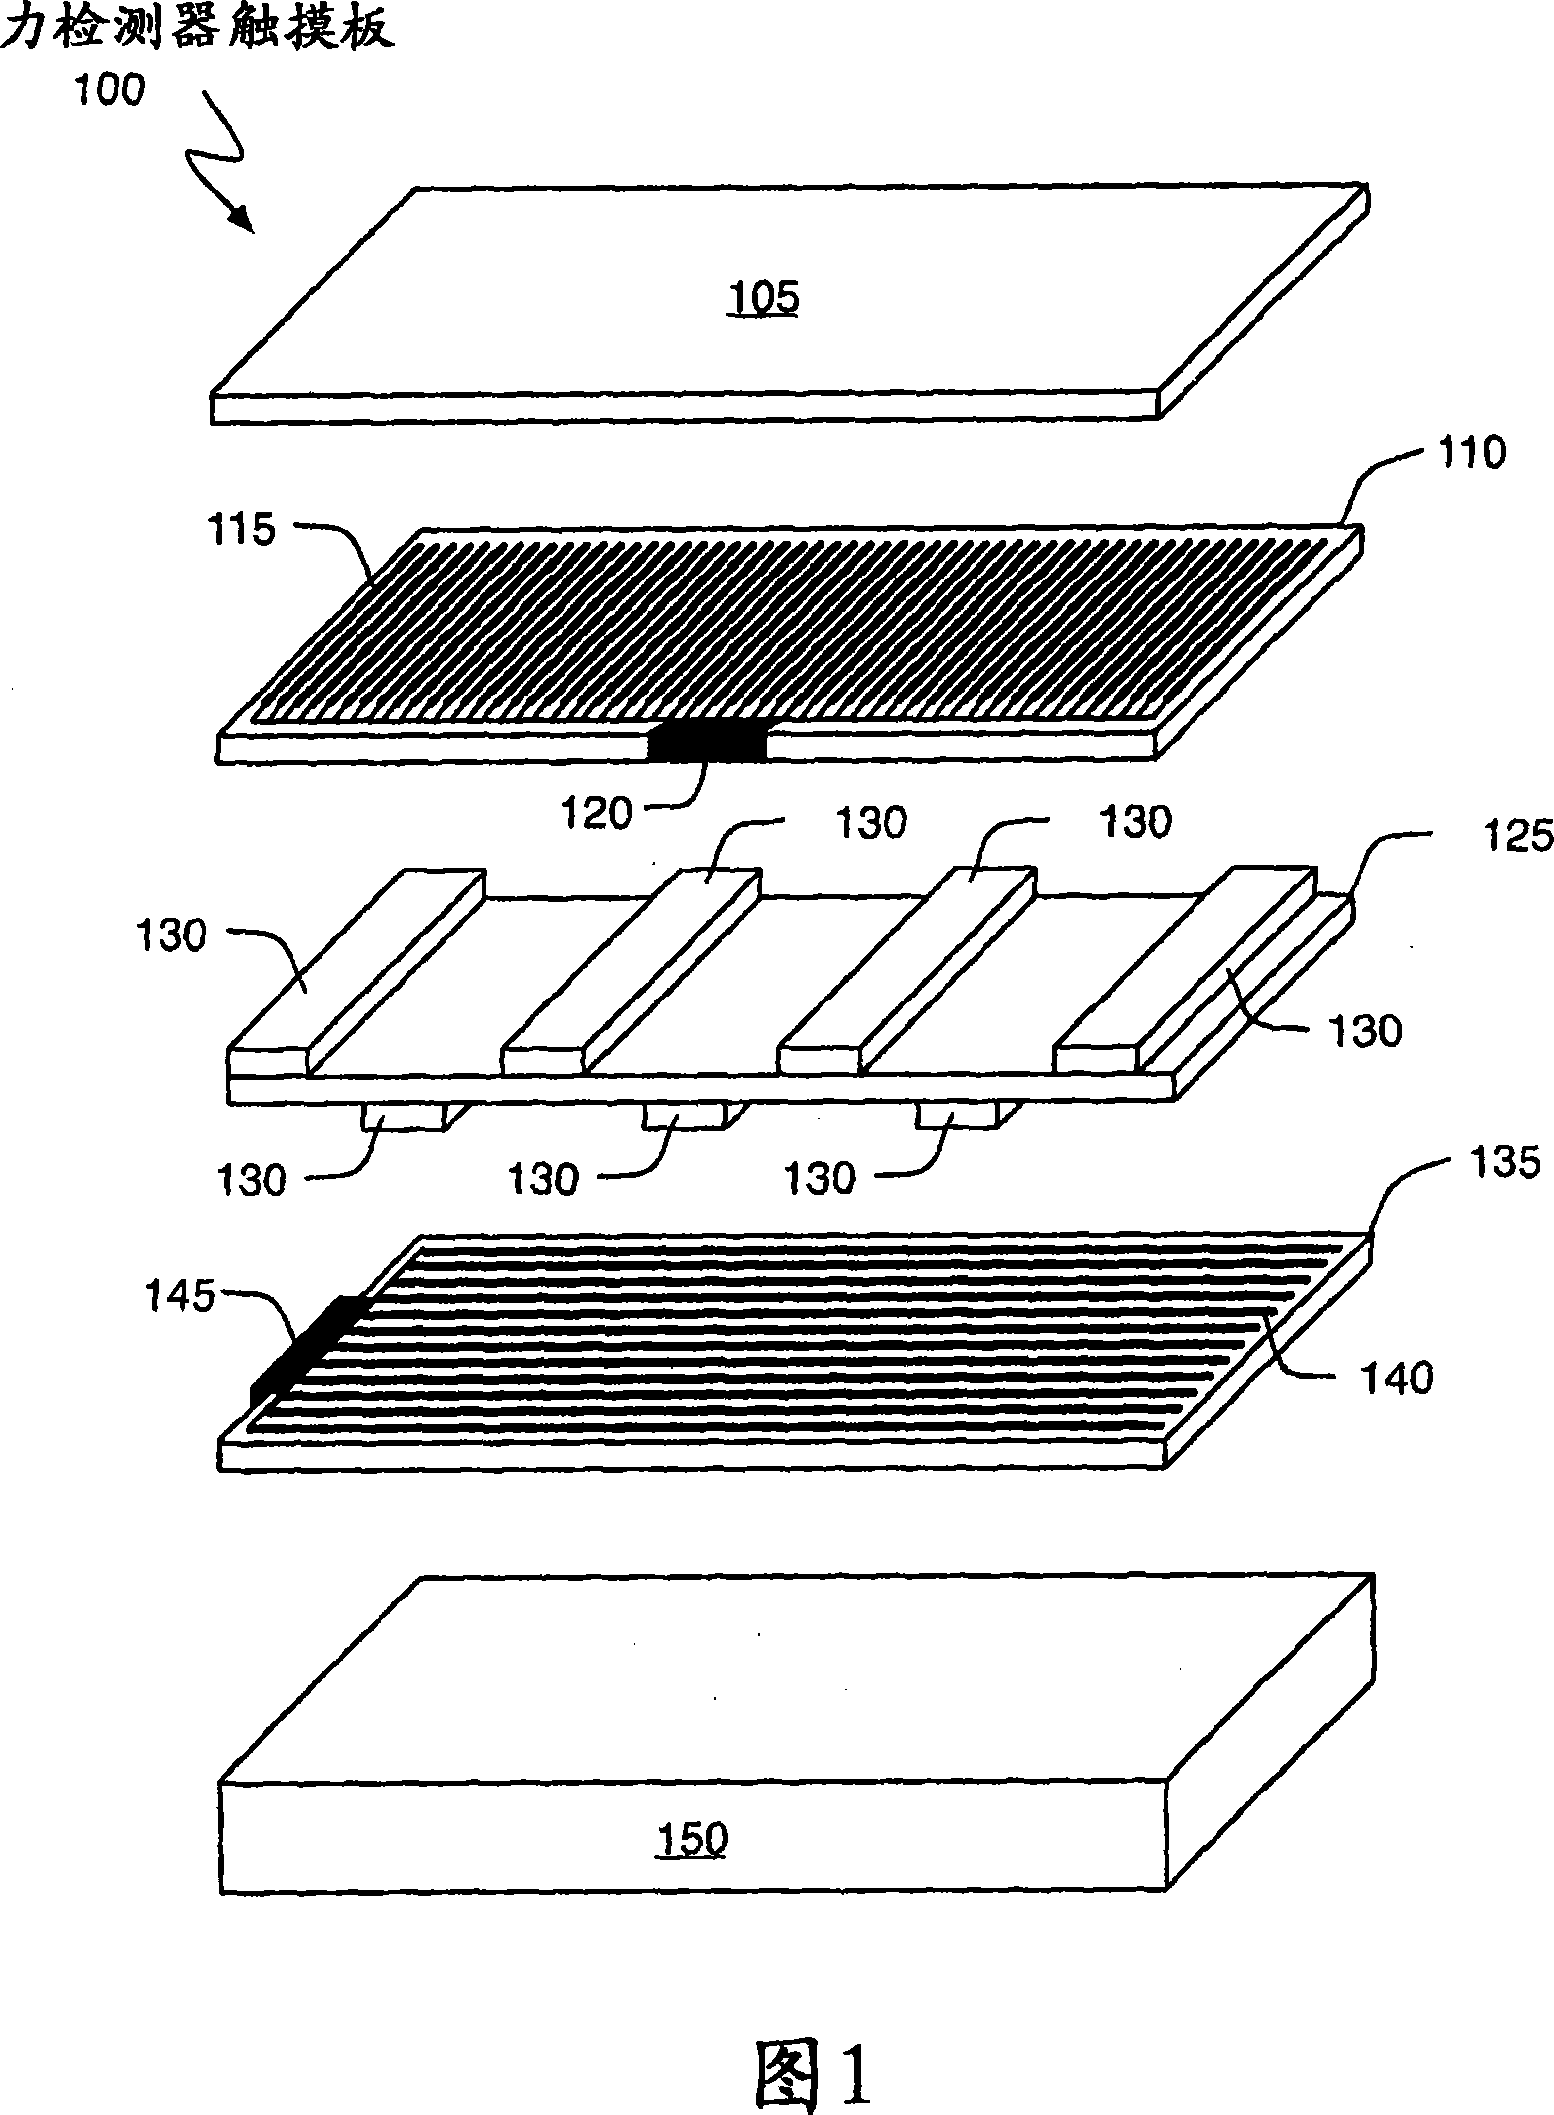 Force imaging input device and system